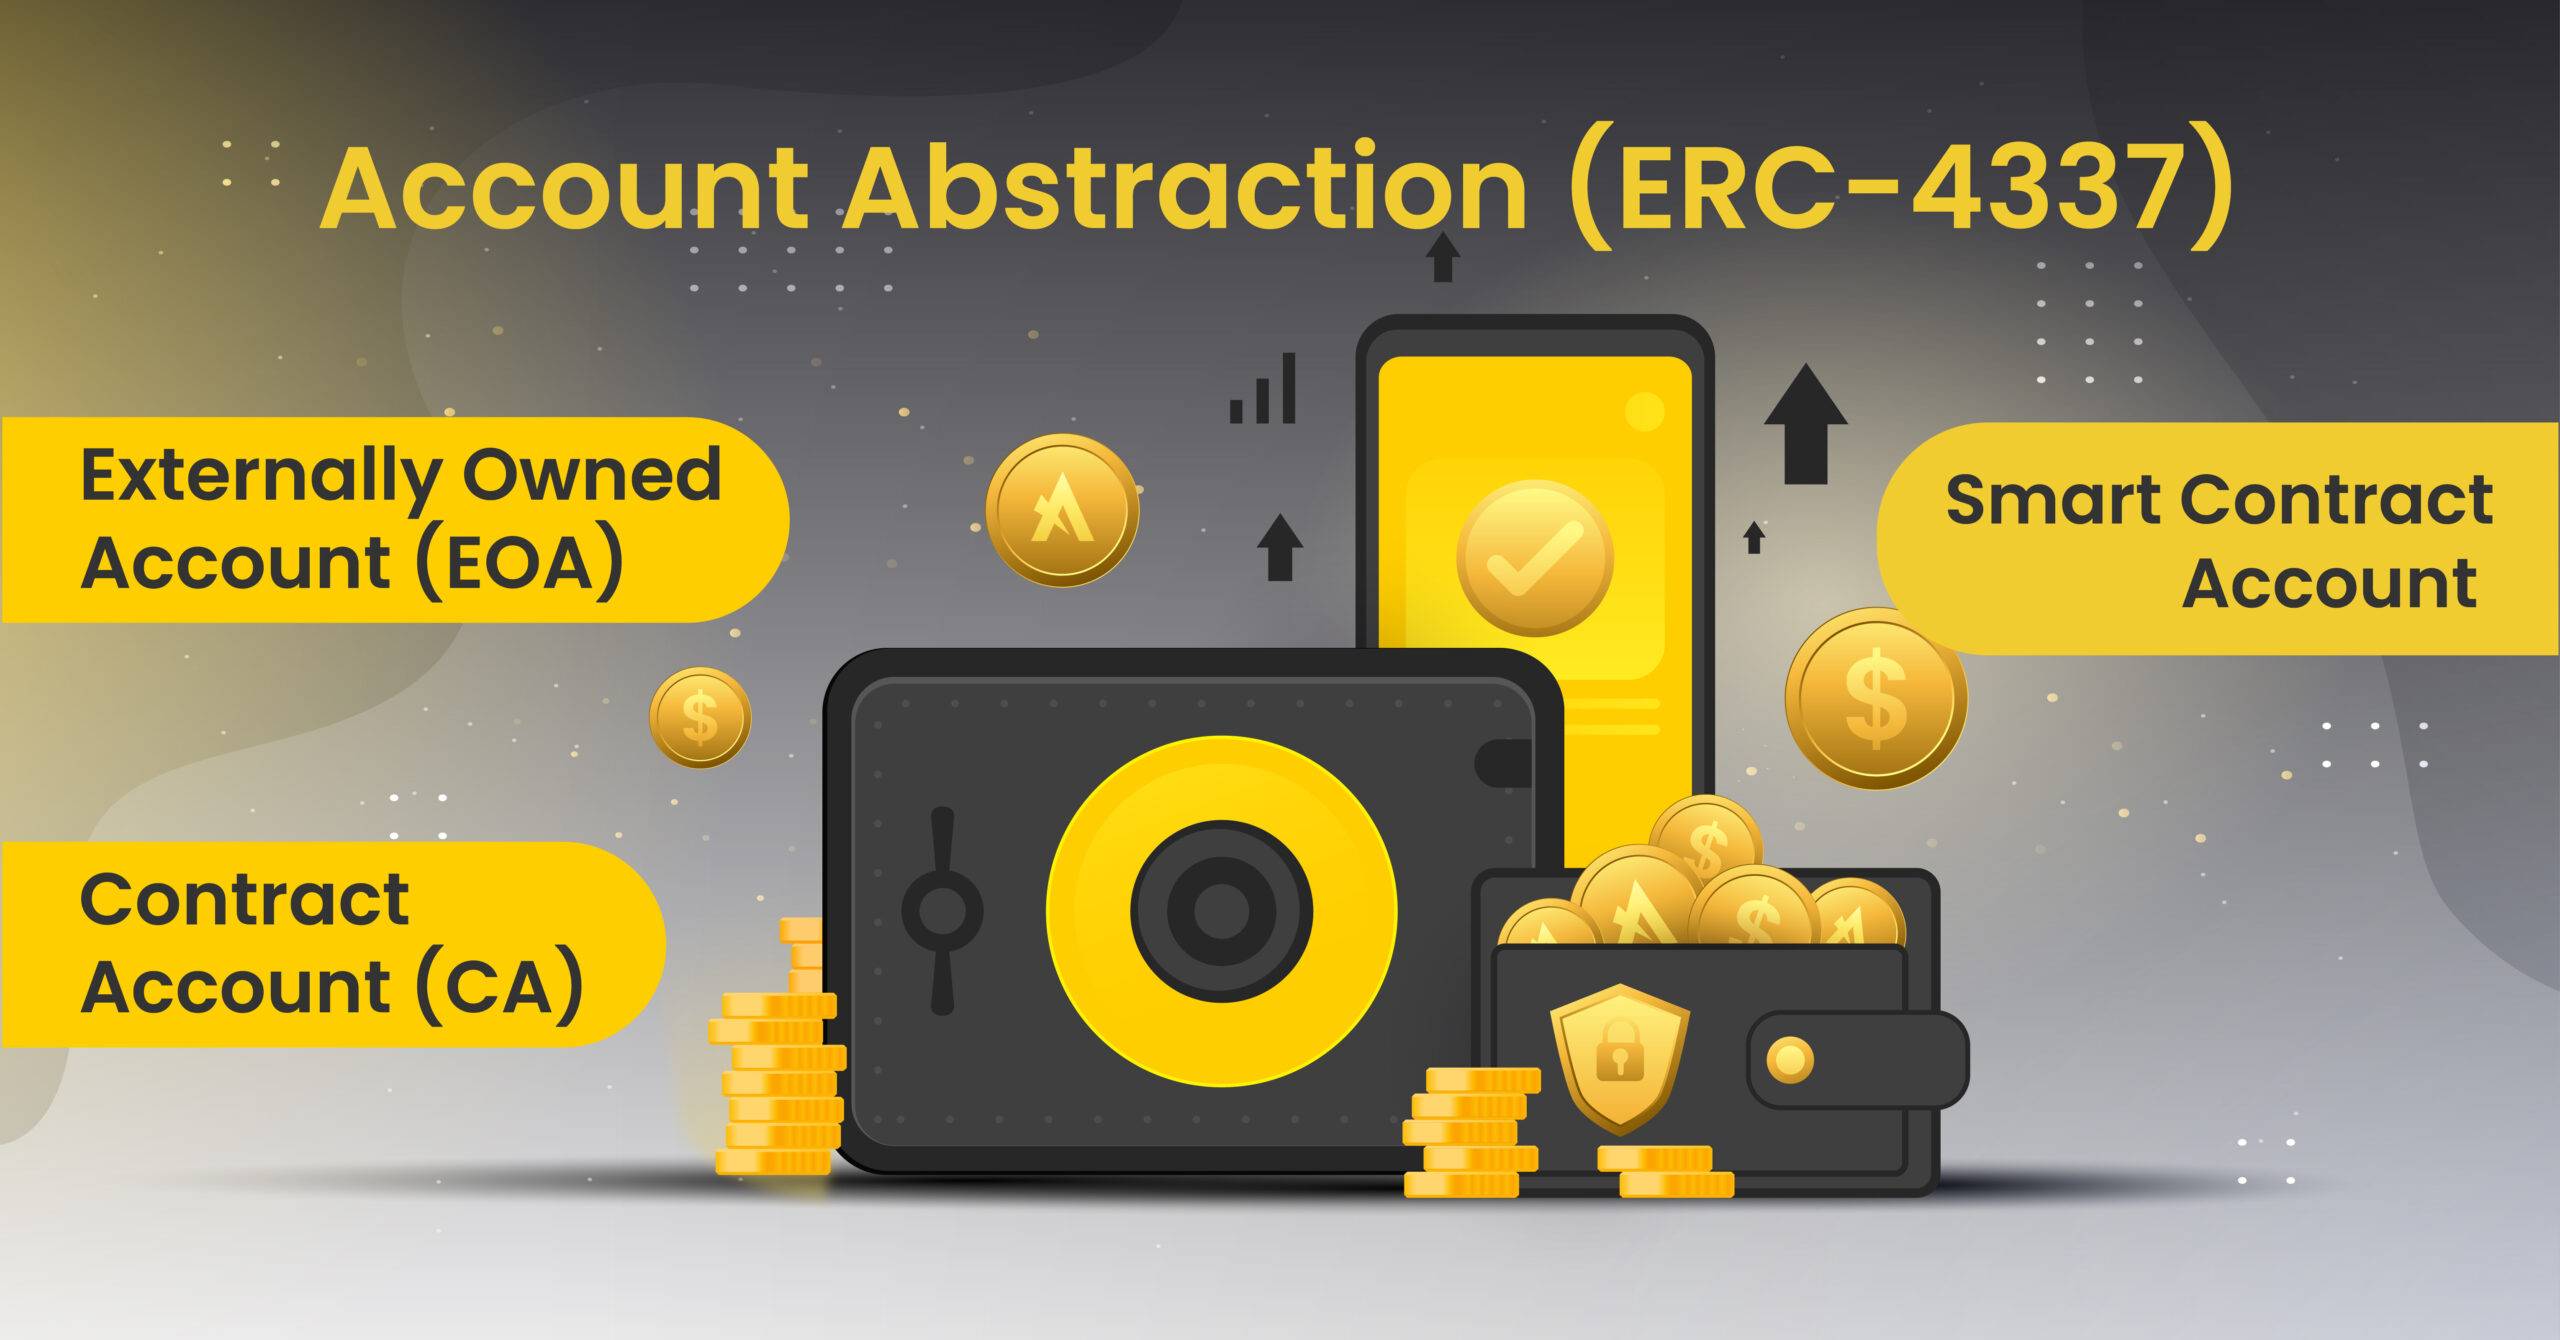 Account Abstraction ERC-4337